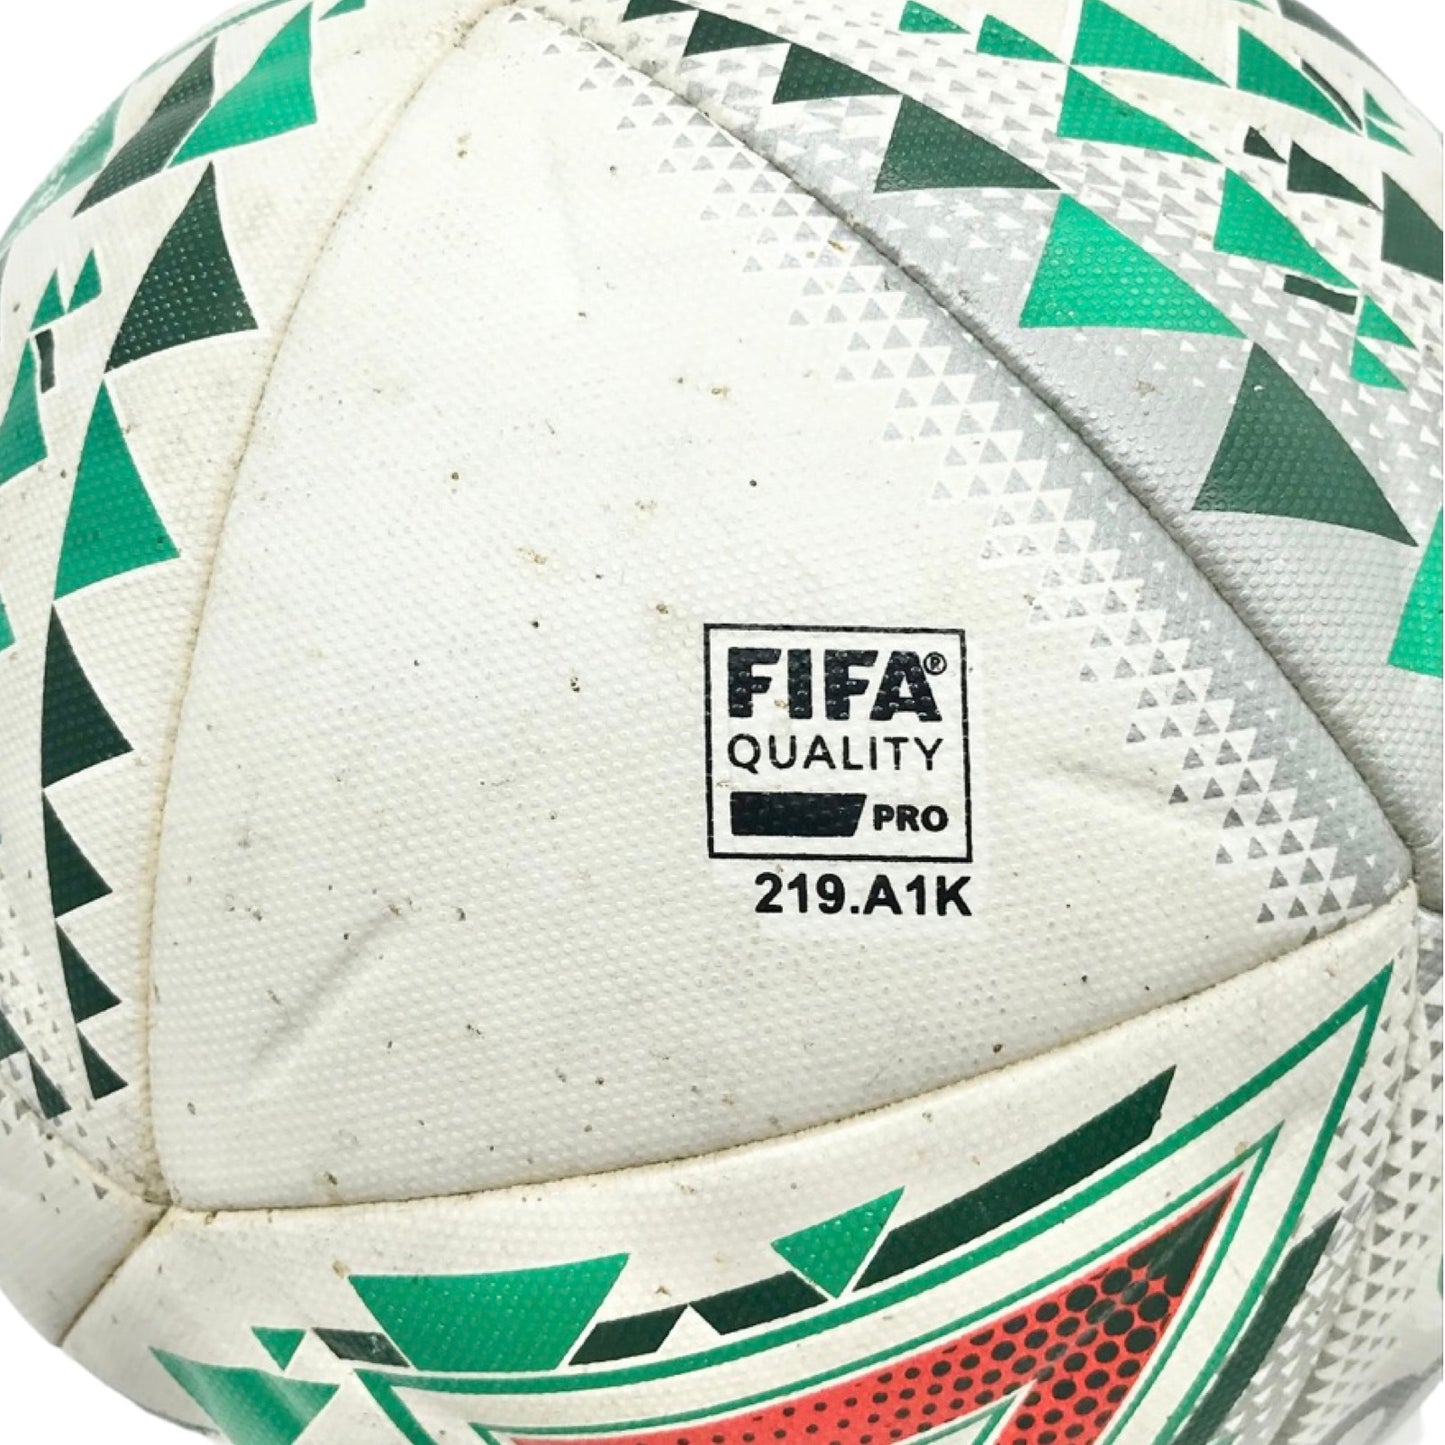 Mitre Delta Max Hyperseam Carabao Cup Final 2019 Match Used Ball